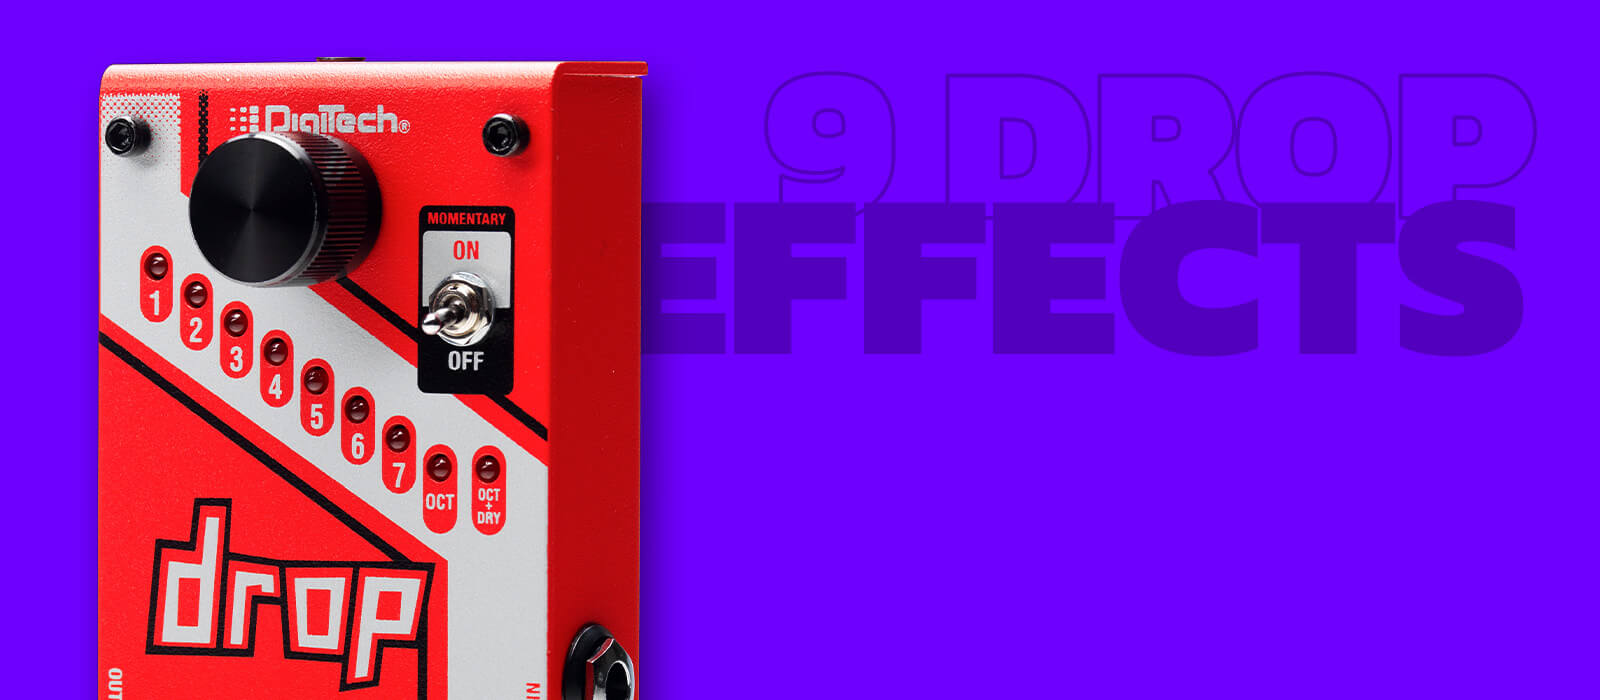 DigiTech Drop polyphonic drop tune guitar pedal in red with drop arrow graphics, purple background and graphics that says 